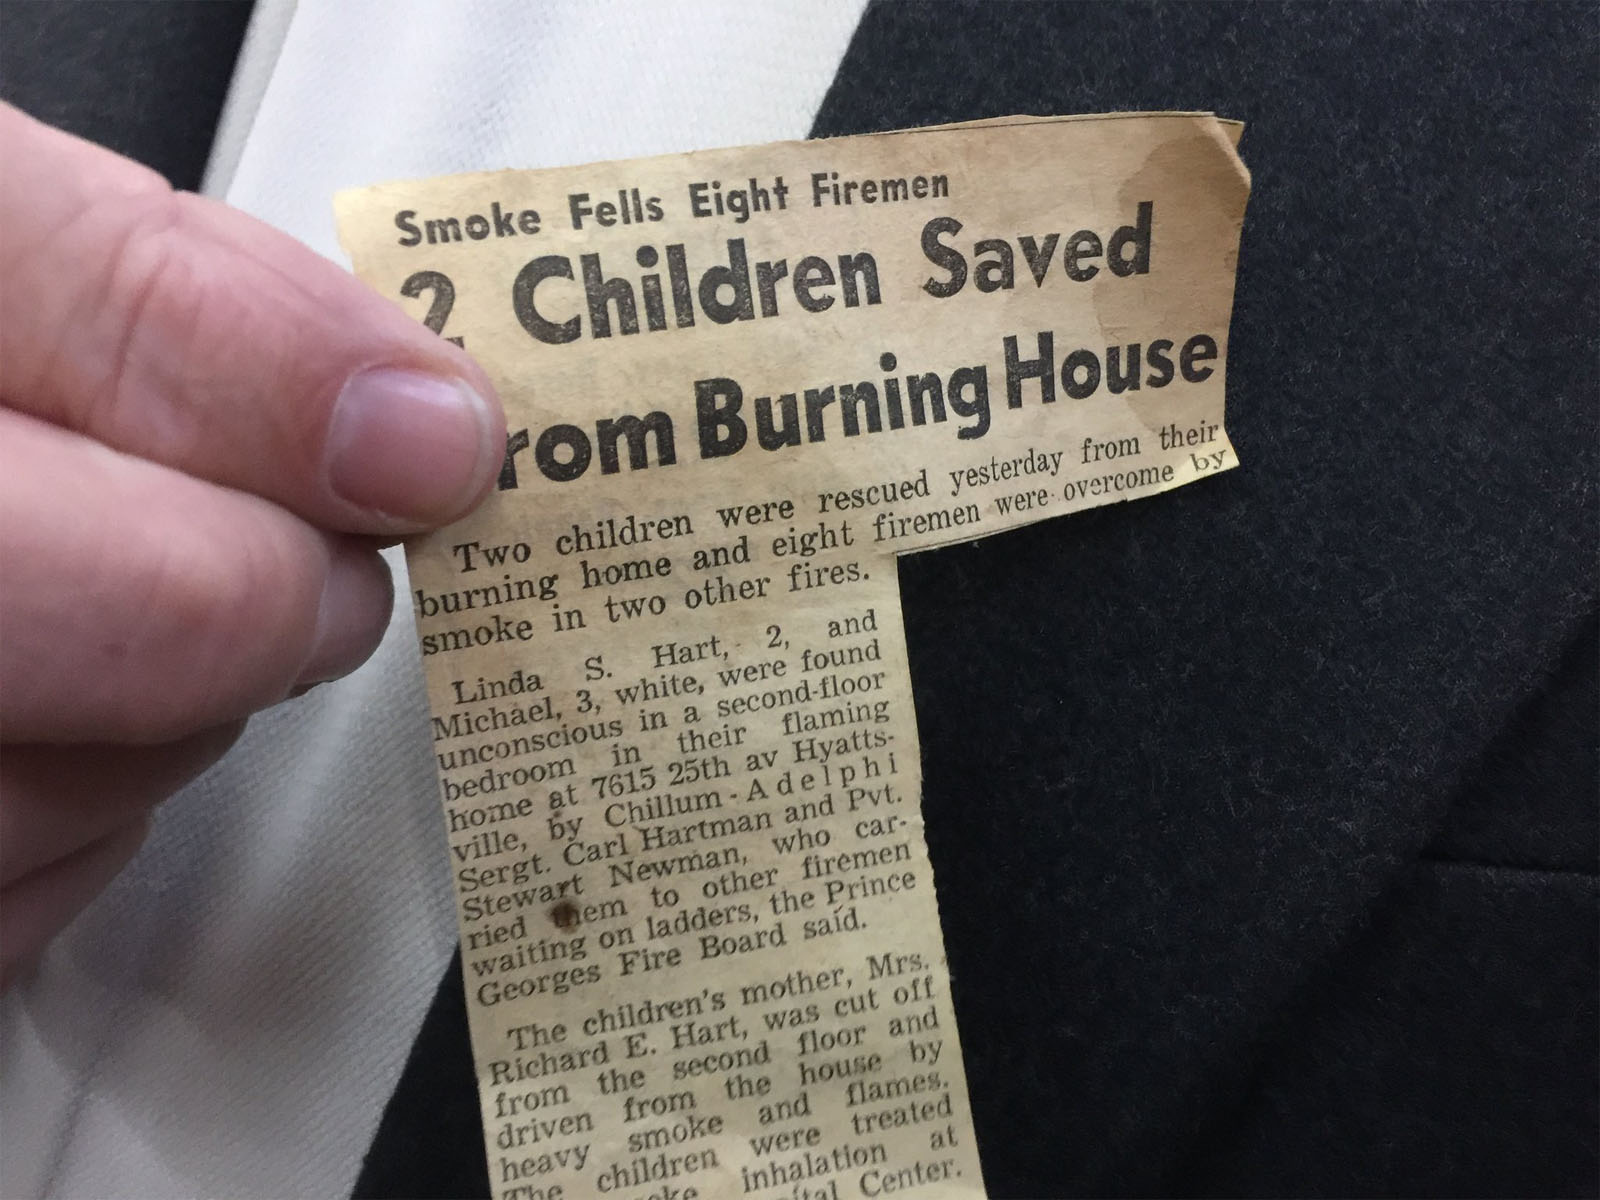 This article helped reunite Linda and Mike Hart with the firefighter who rescued them as toddles from a burning more than 57 years ago. (WTOP/Kristi King)